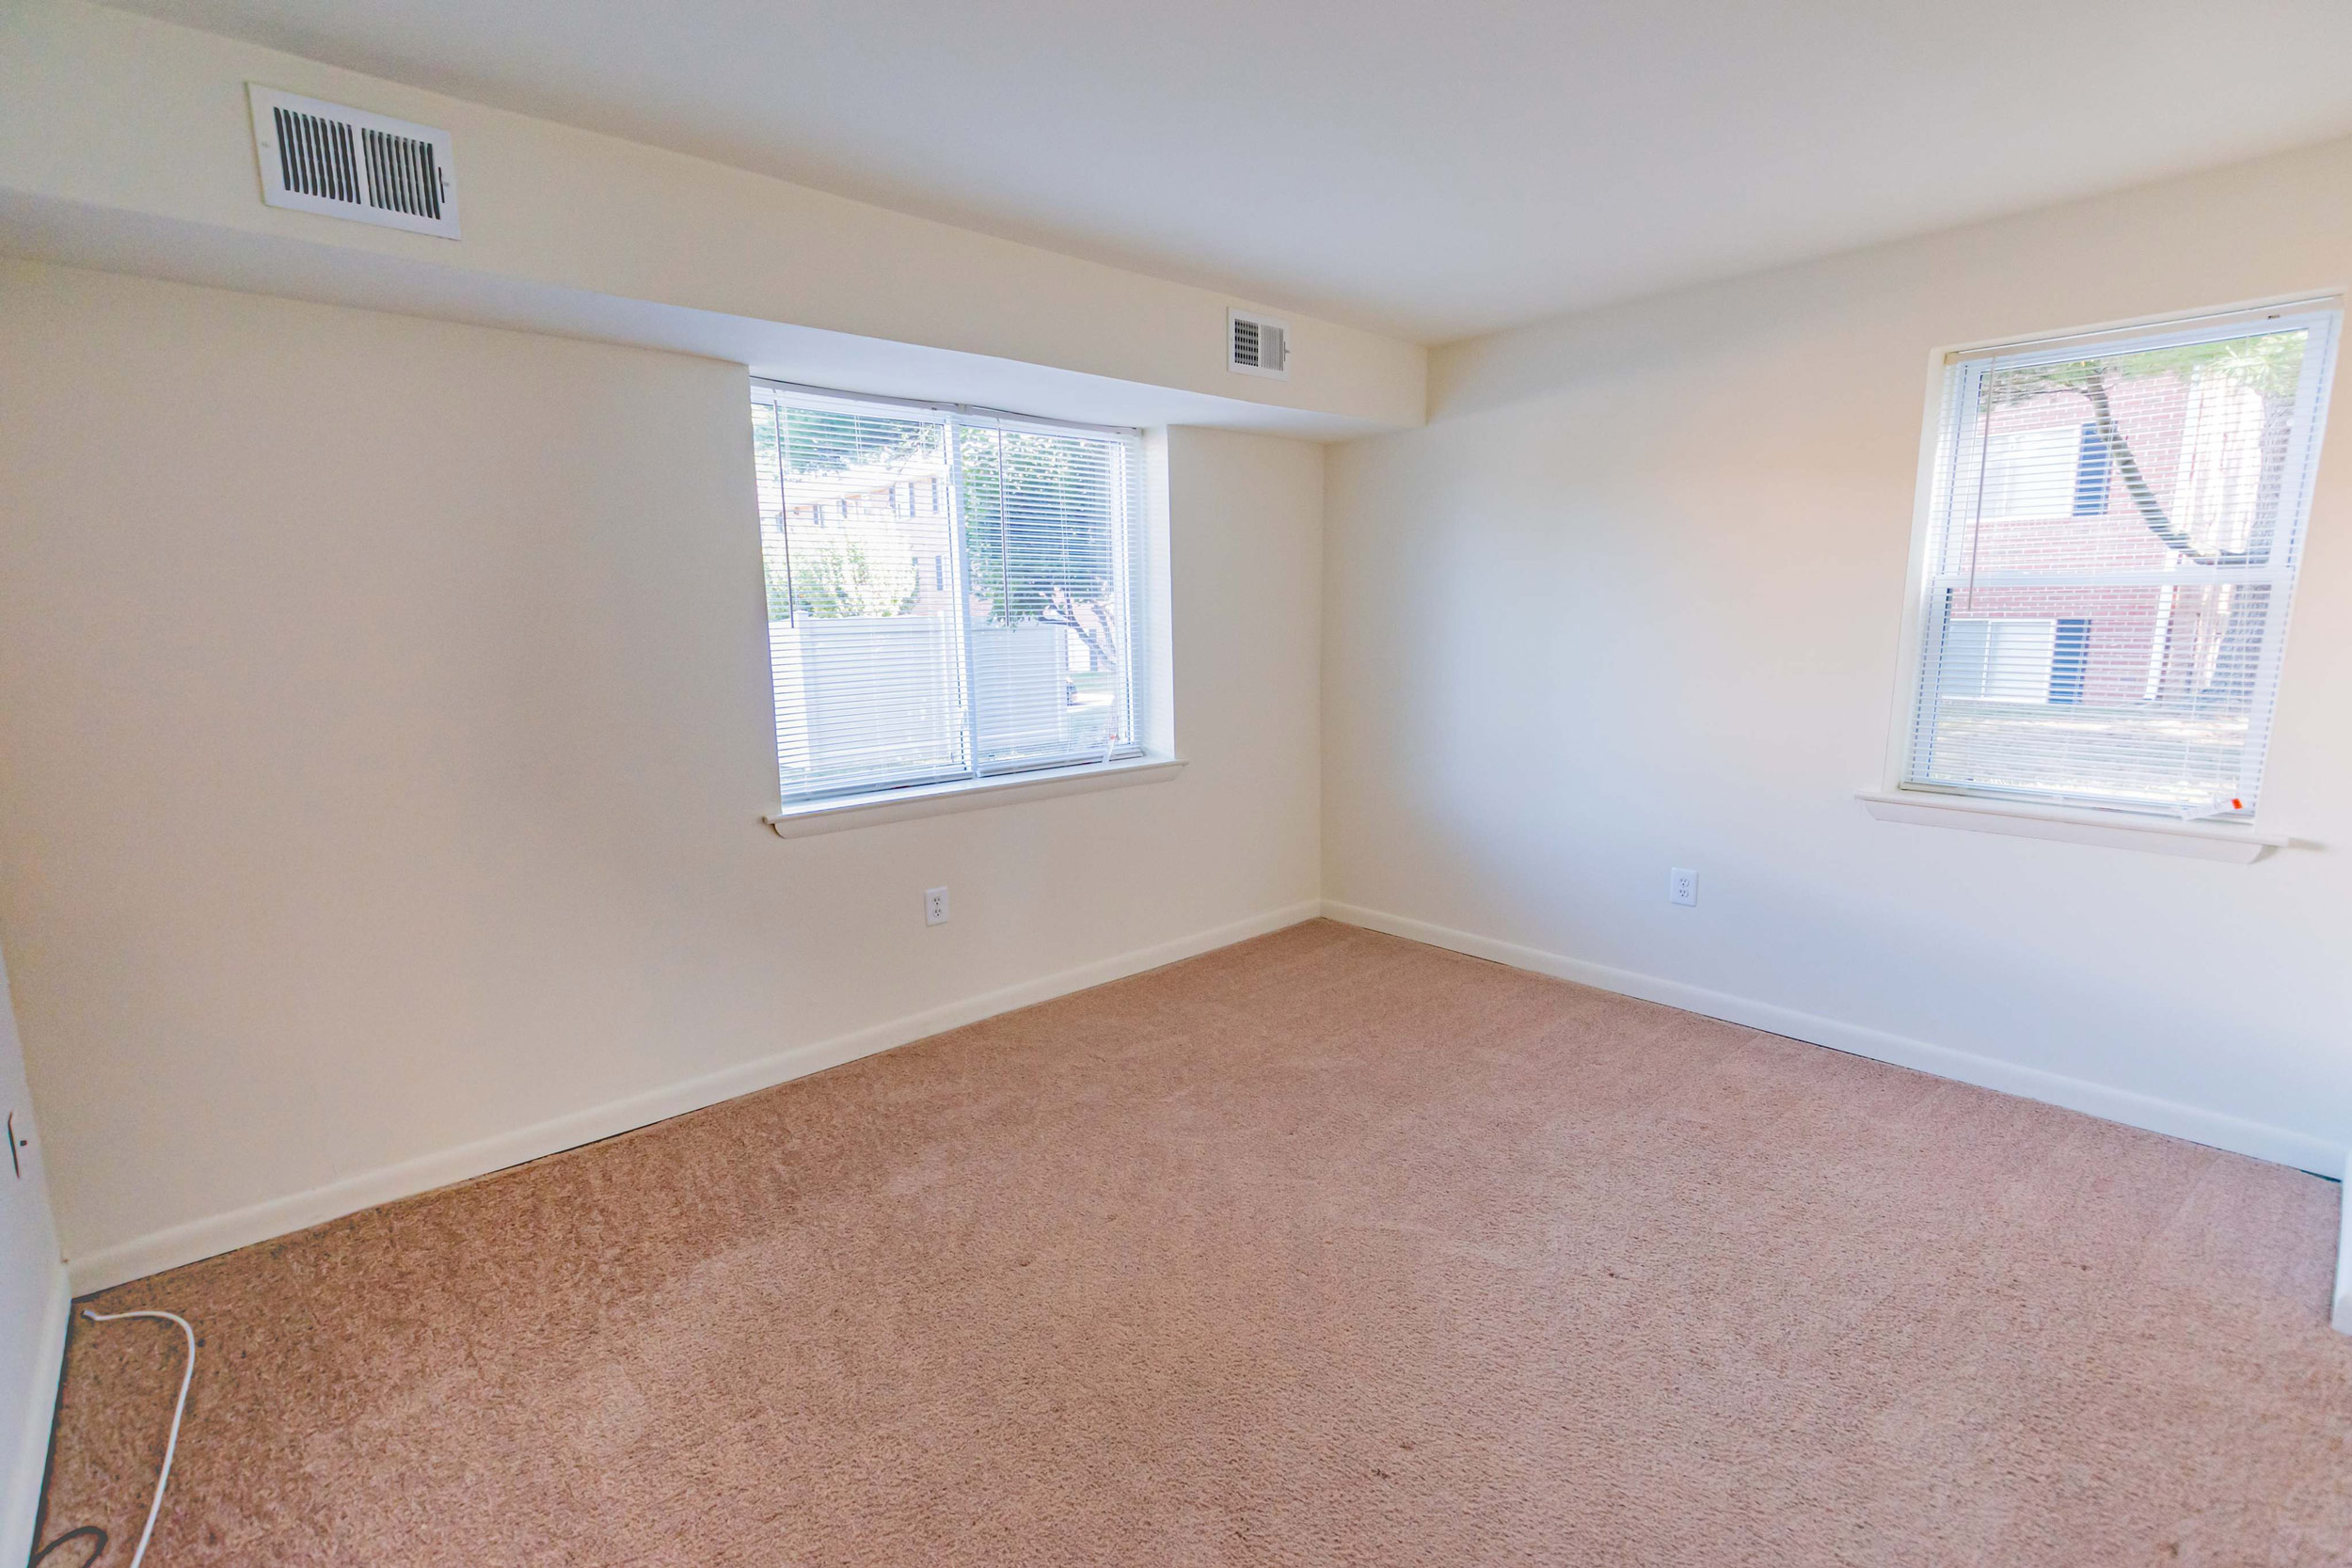 Bedroom area of an apartment unfurnished, fitted with carpet flooring, air vents, and a high ceiling